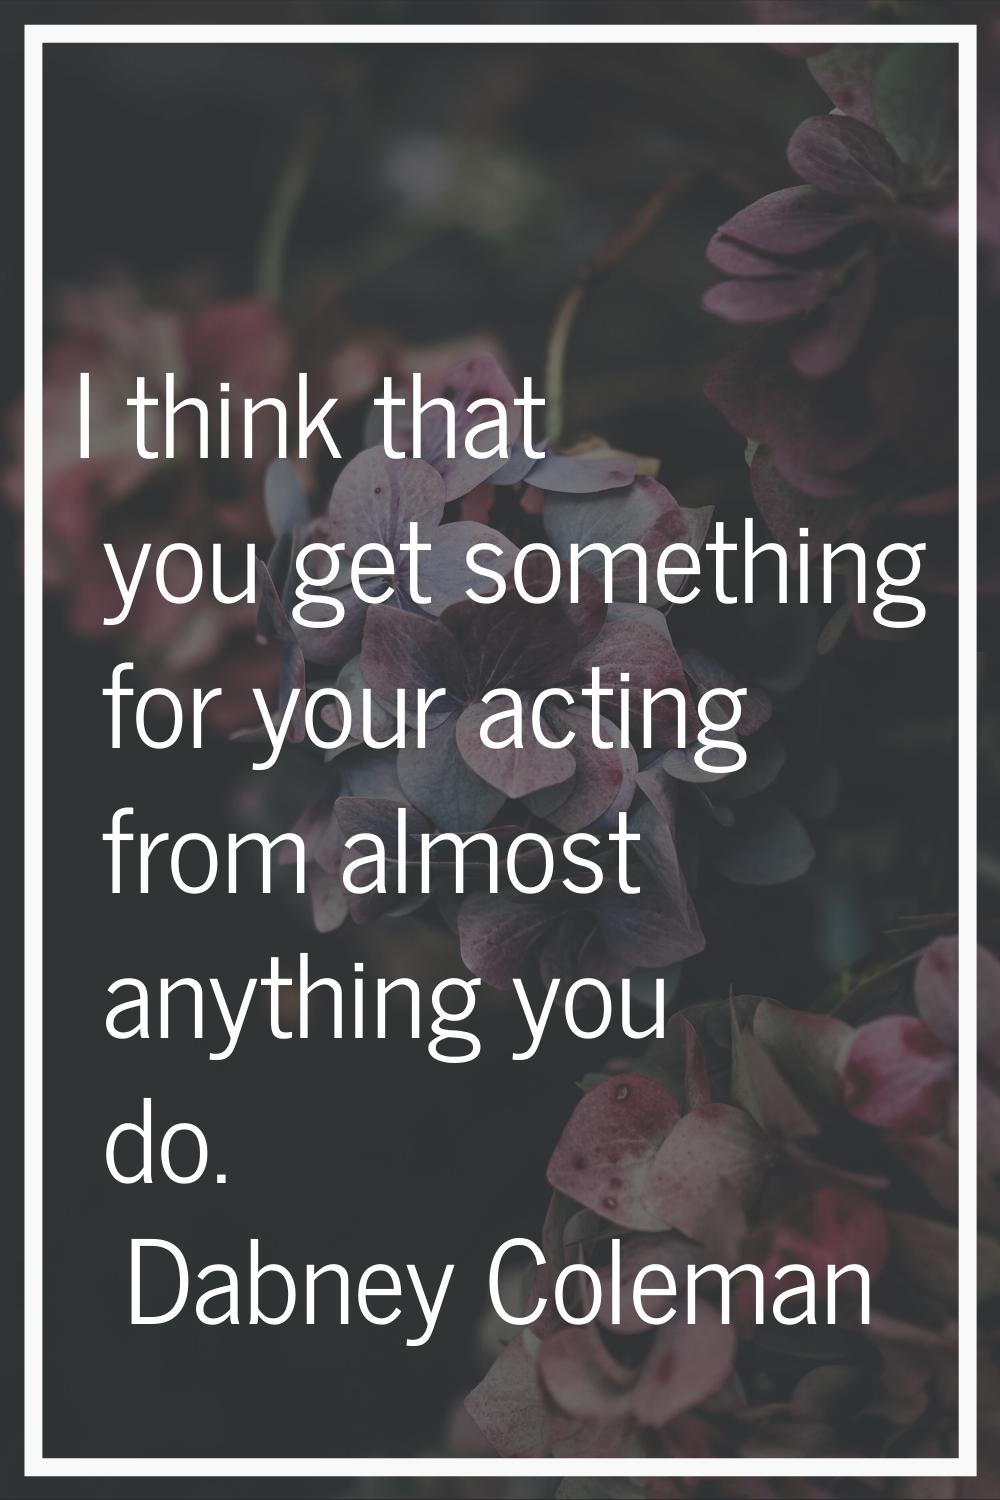 I think that you get something for your acting from almost anything you do.